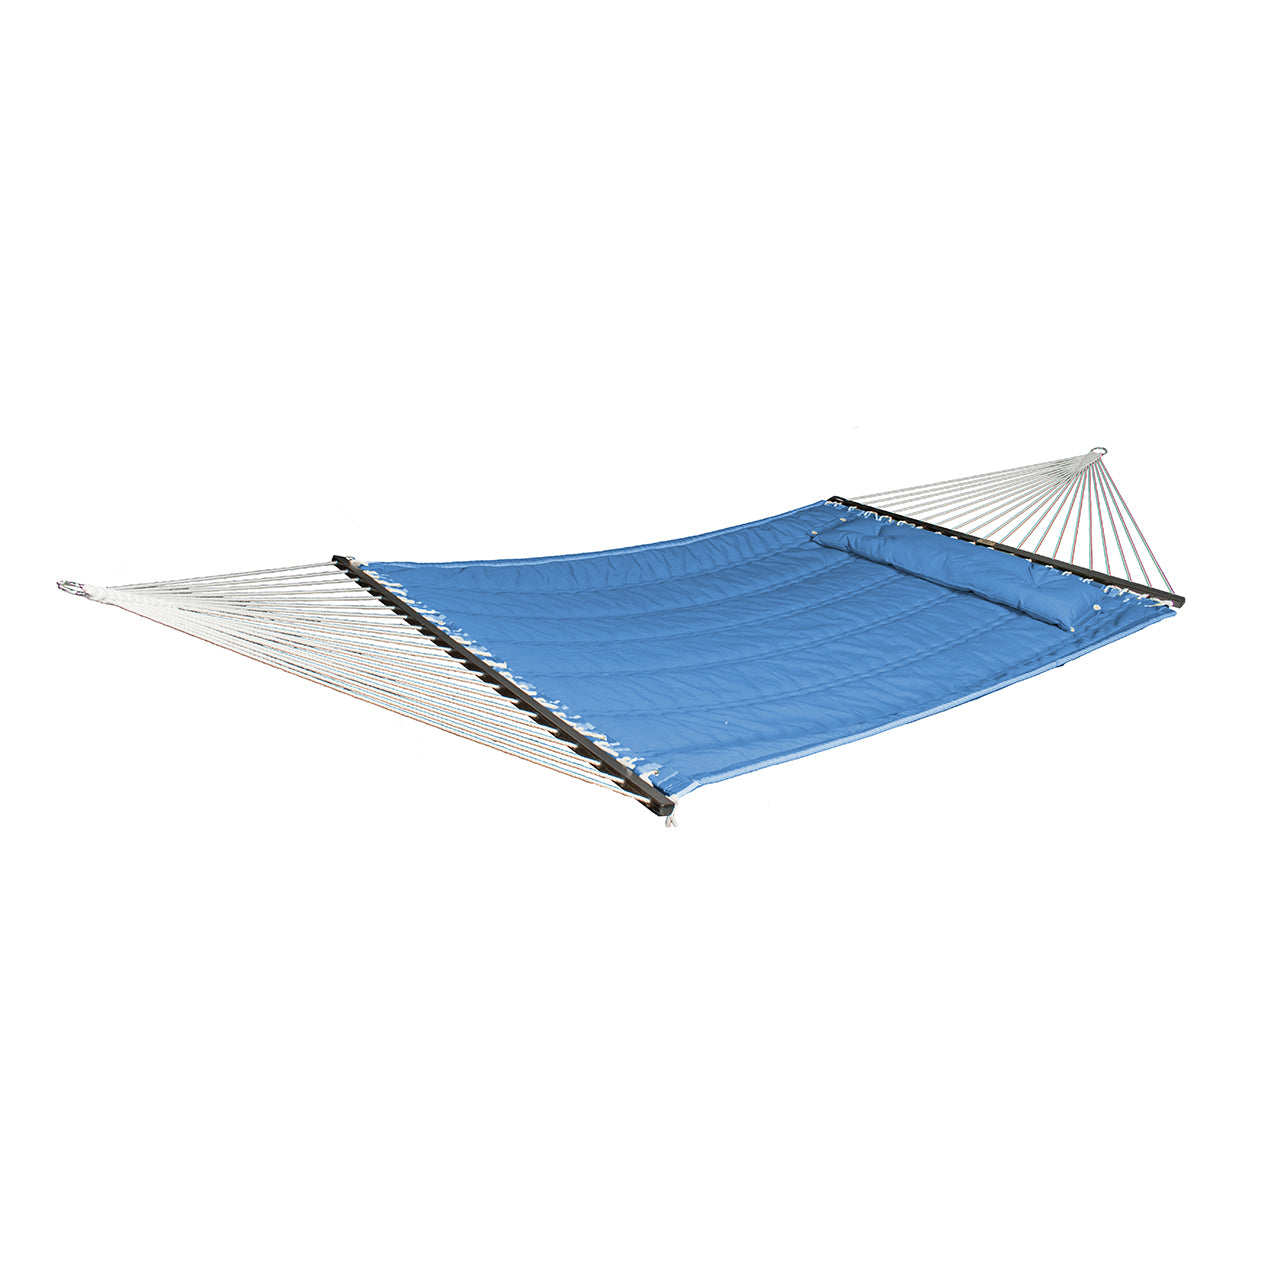 Bliss Hammocks 55-inch Wide 2-Person Reversible Quilted Hammock with Spreader Bars and a Pillow in the blue stripe / solid blue variation showing the solid blue side.